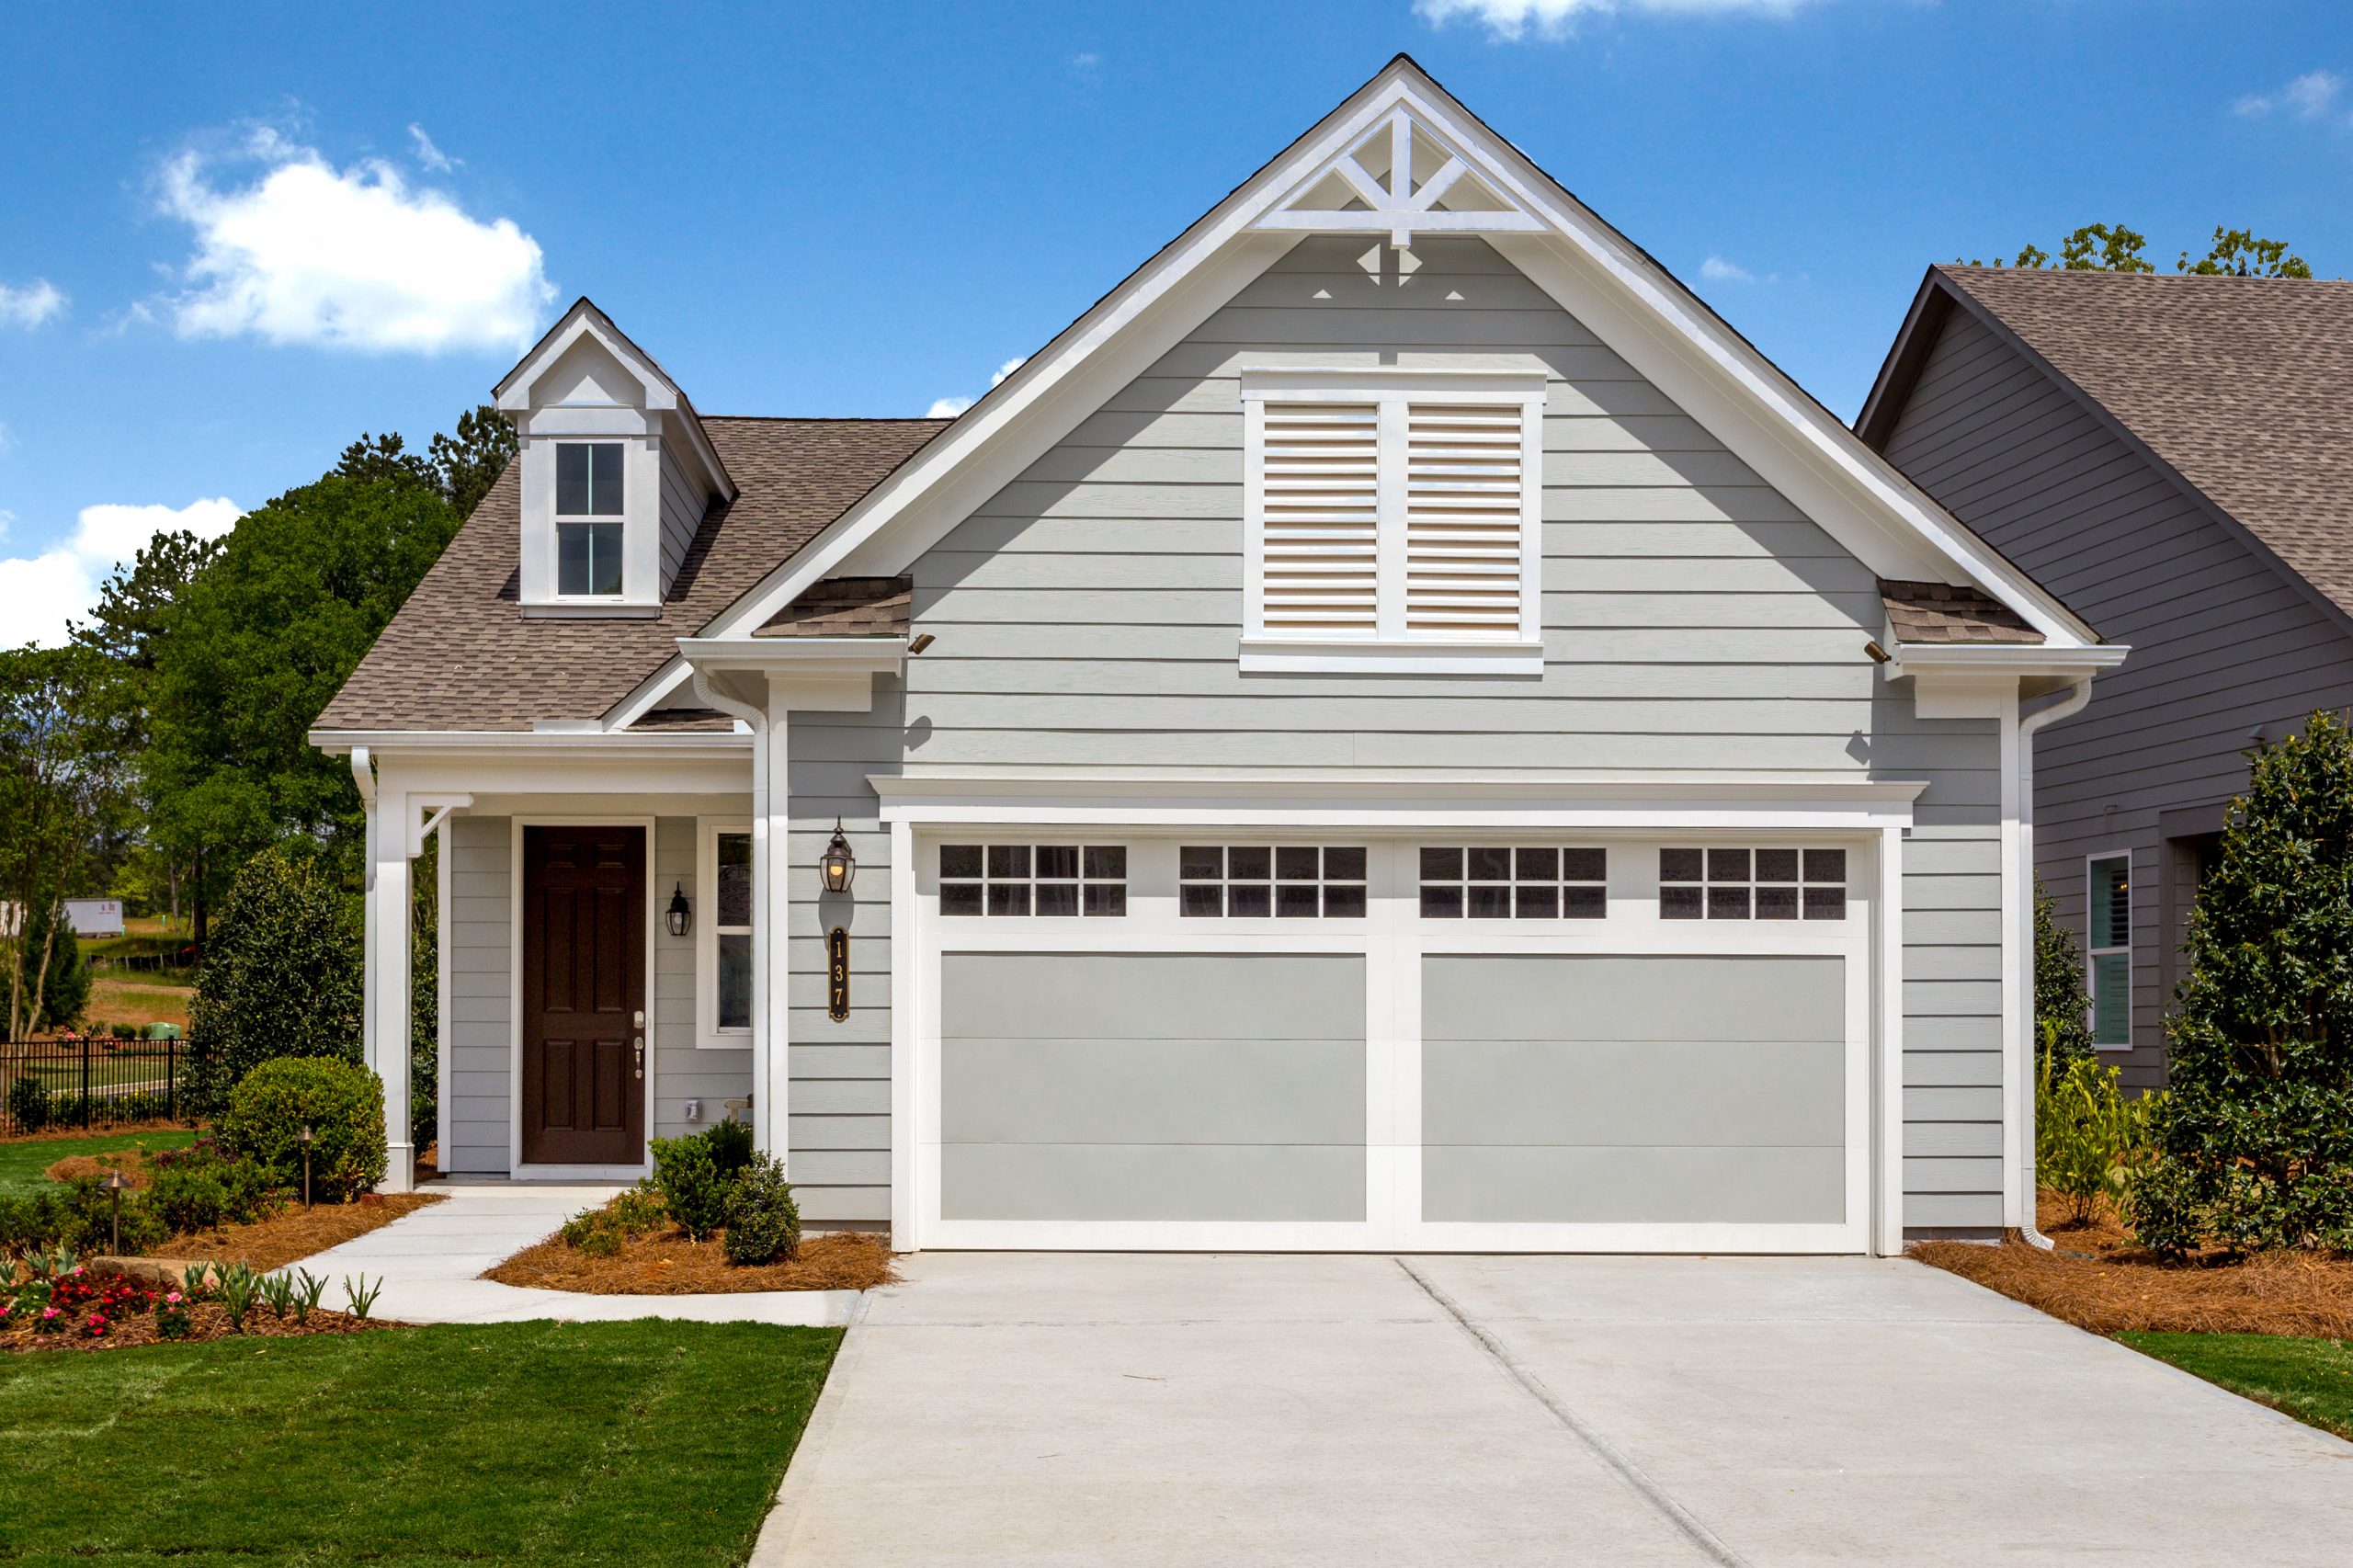 Kolter Homes to Feature Four Decorated Models in 2020 Atlanta Parade of Homes